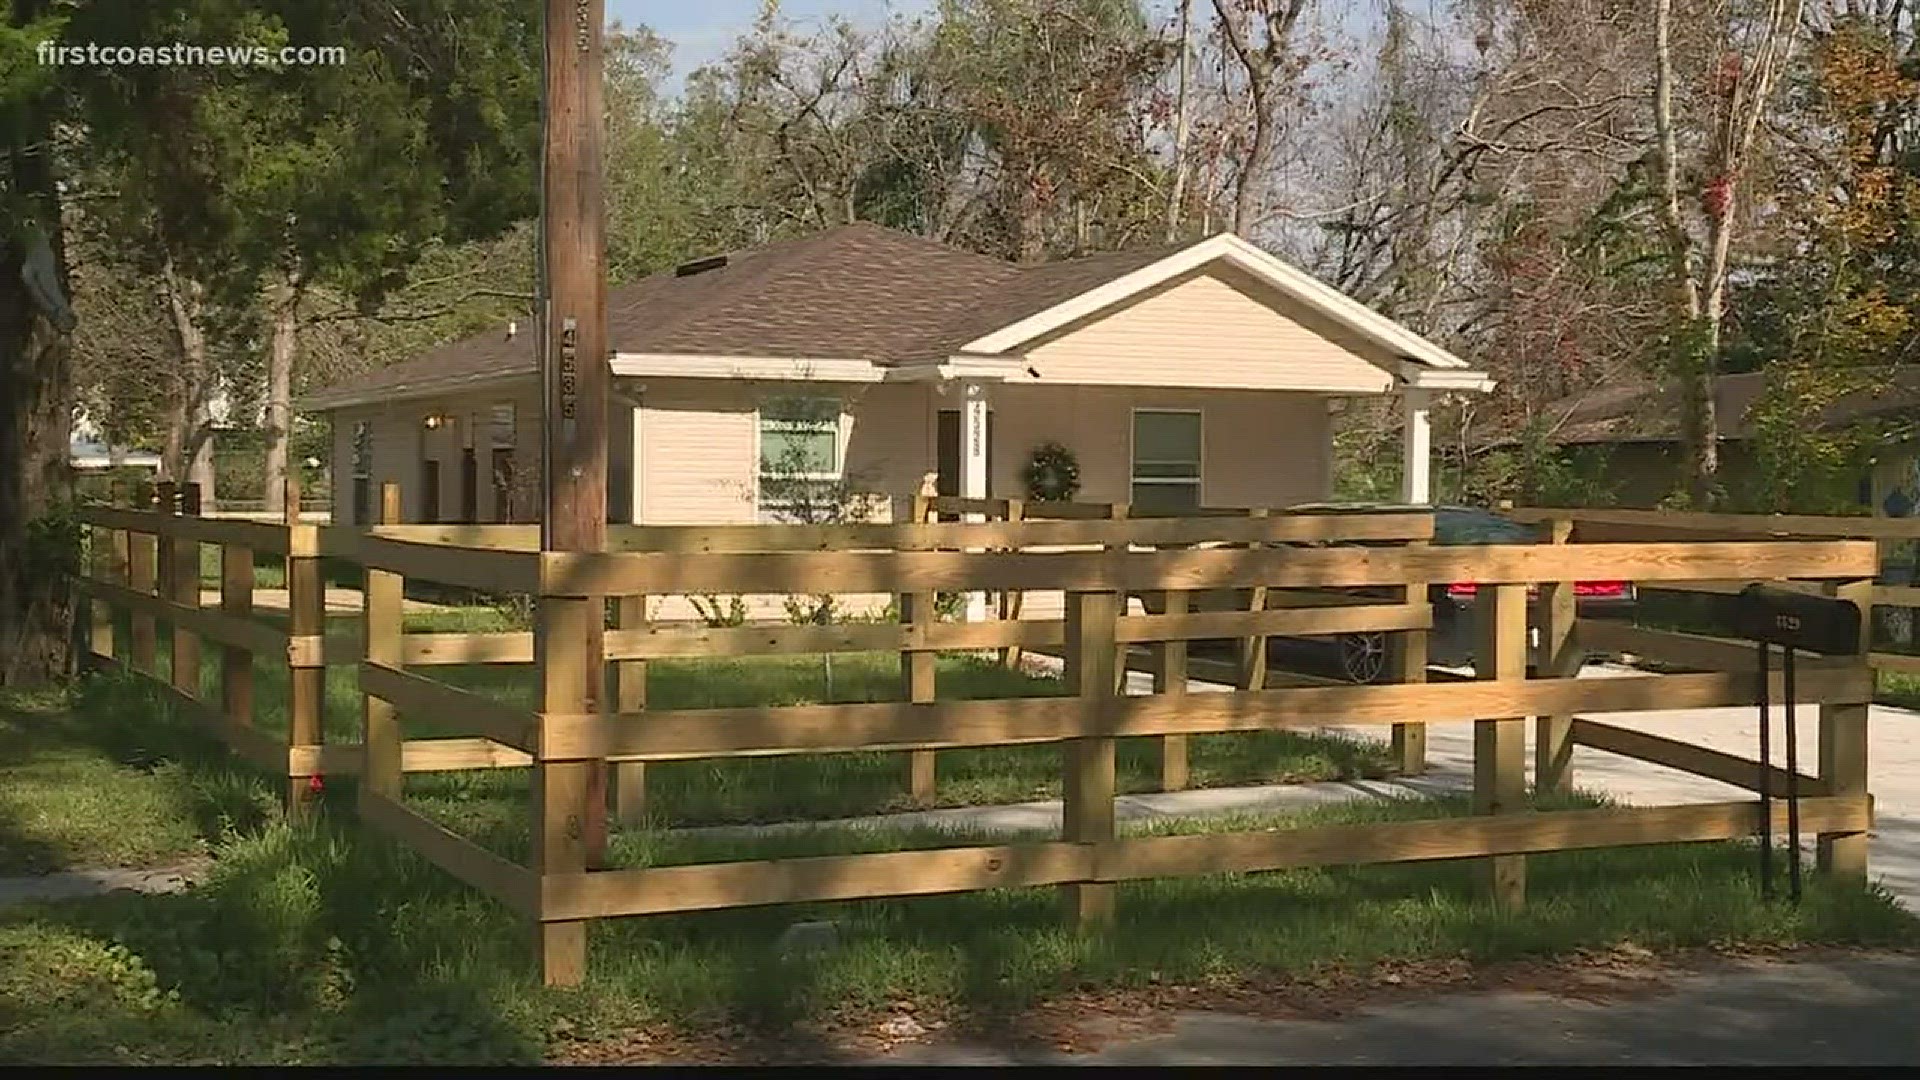 A local woman thought she bought a home, only to find out that after the sale, it was rented out last minute leaving the buyer homeless.